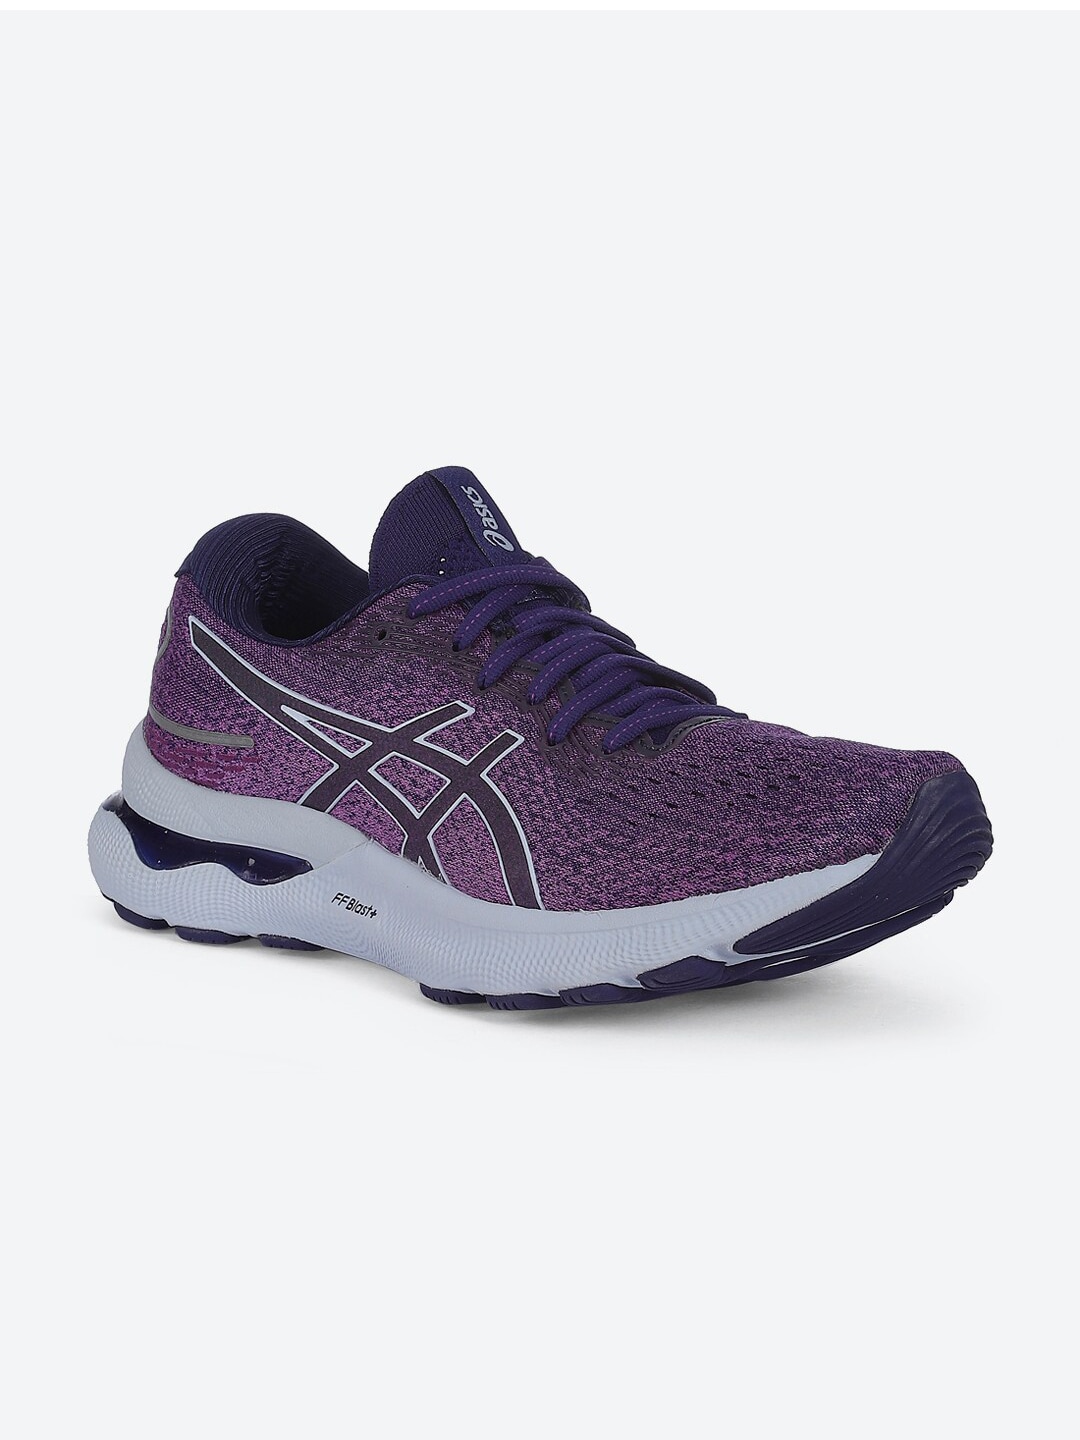 ASICS Women Violet Sports Shoes Price in India